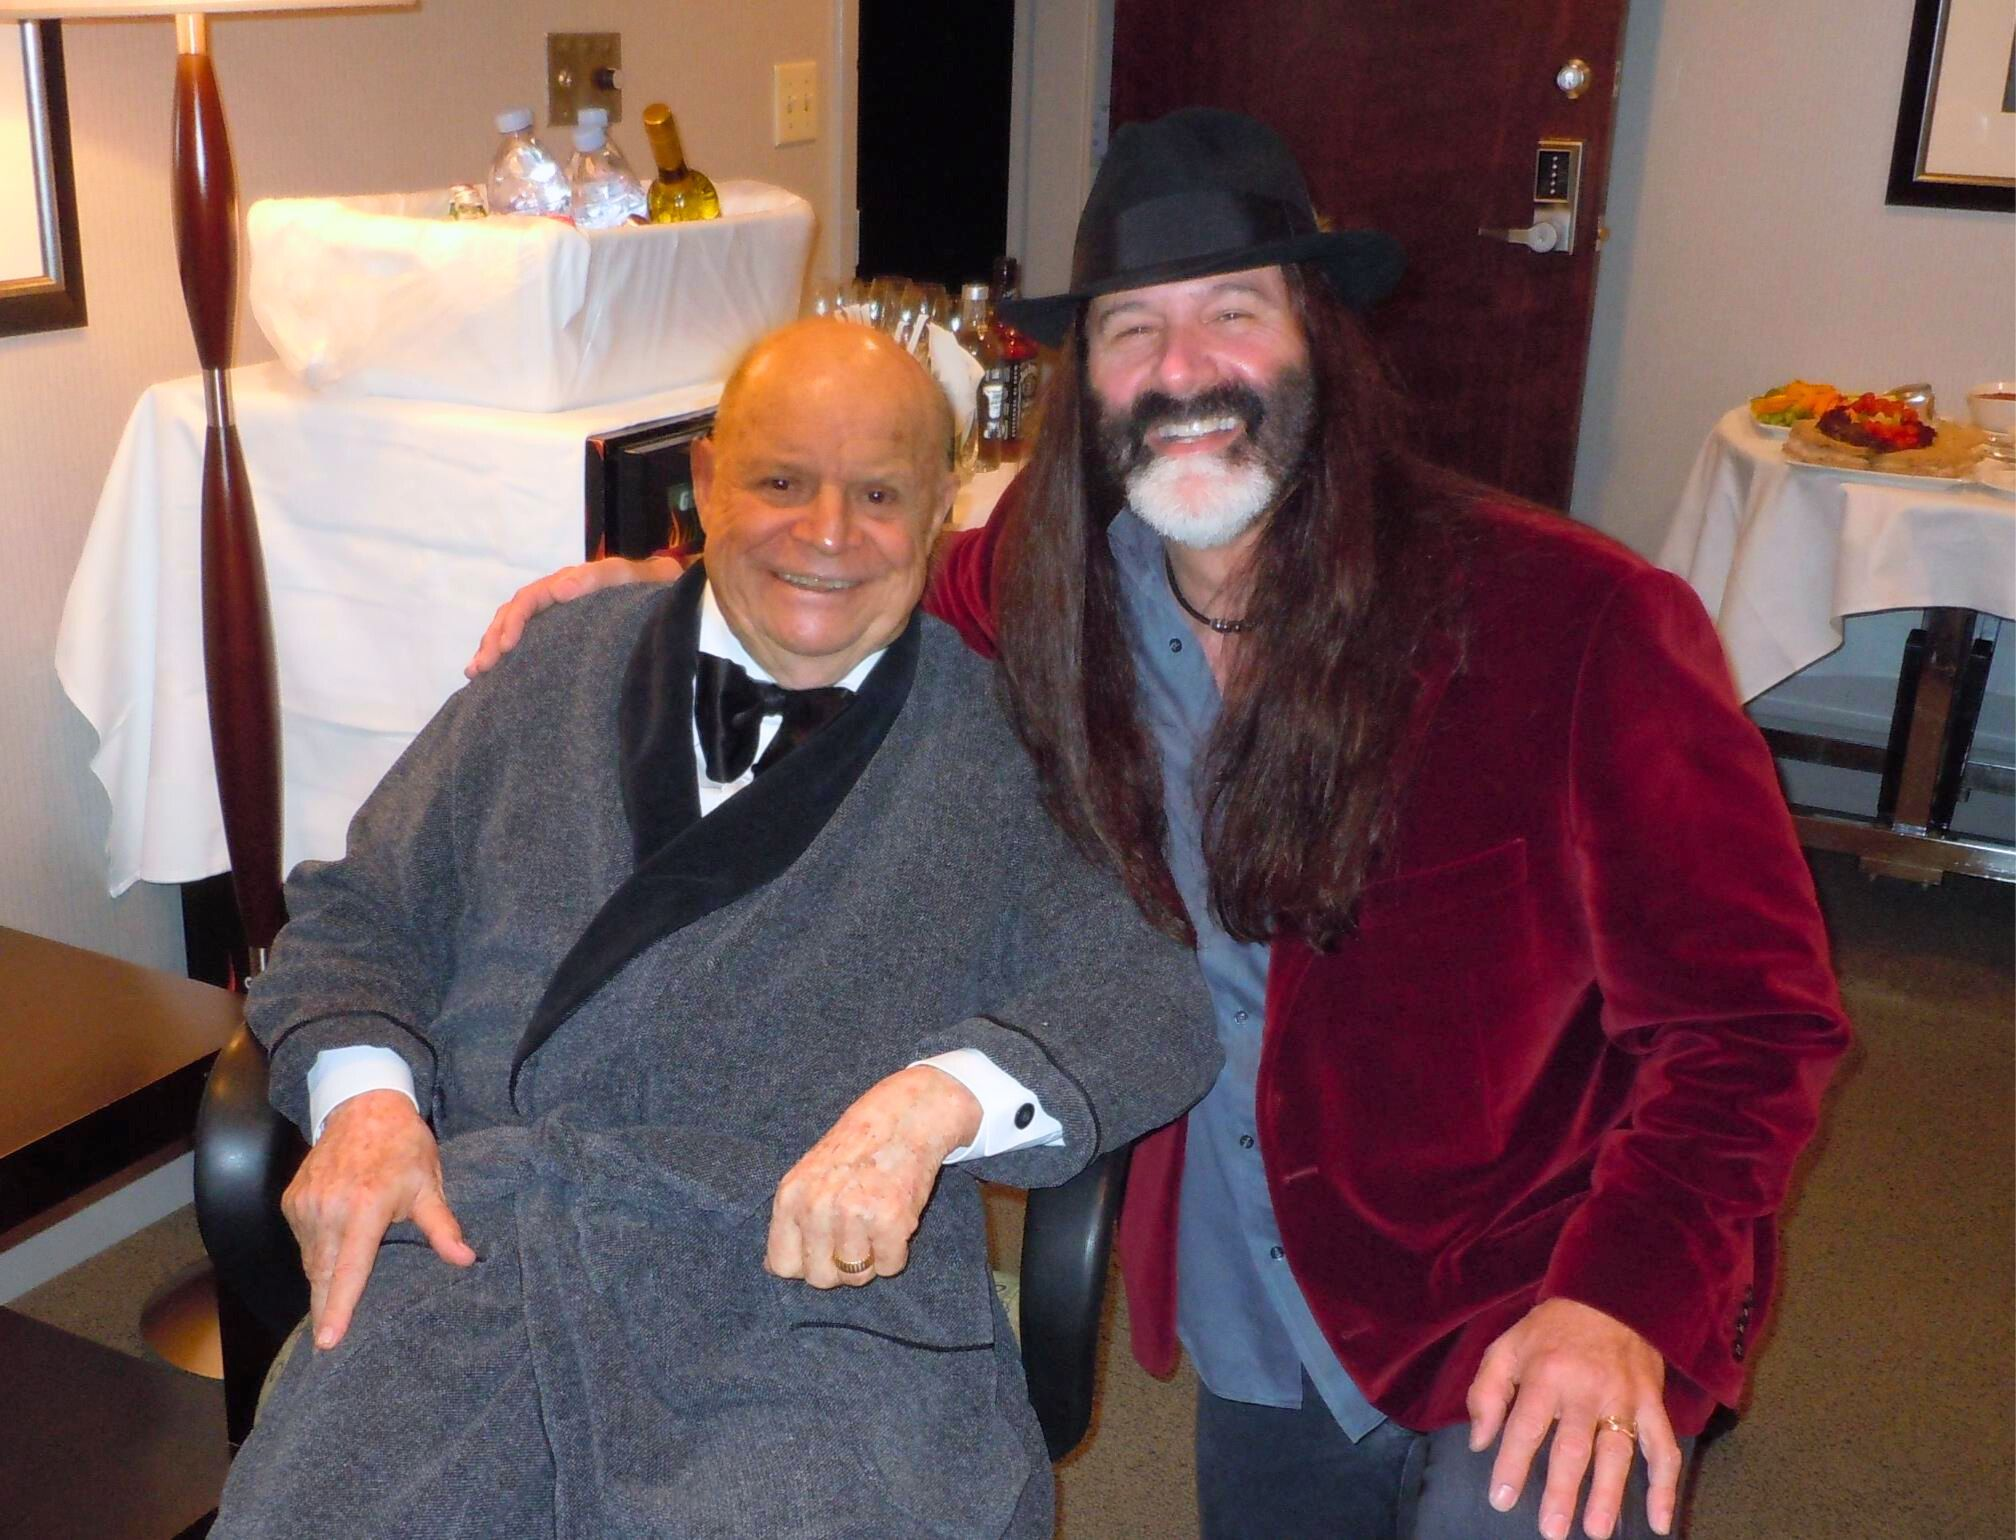 FLASHBACK: Pierre and Mr. Warmth Himself, Don Rickles